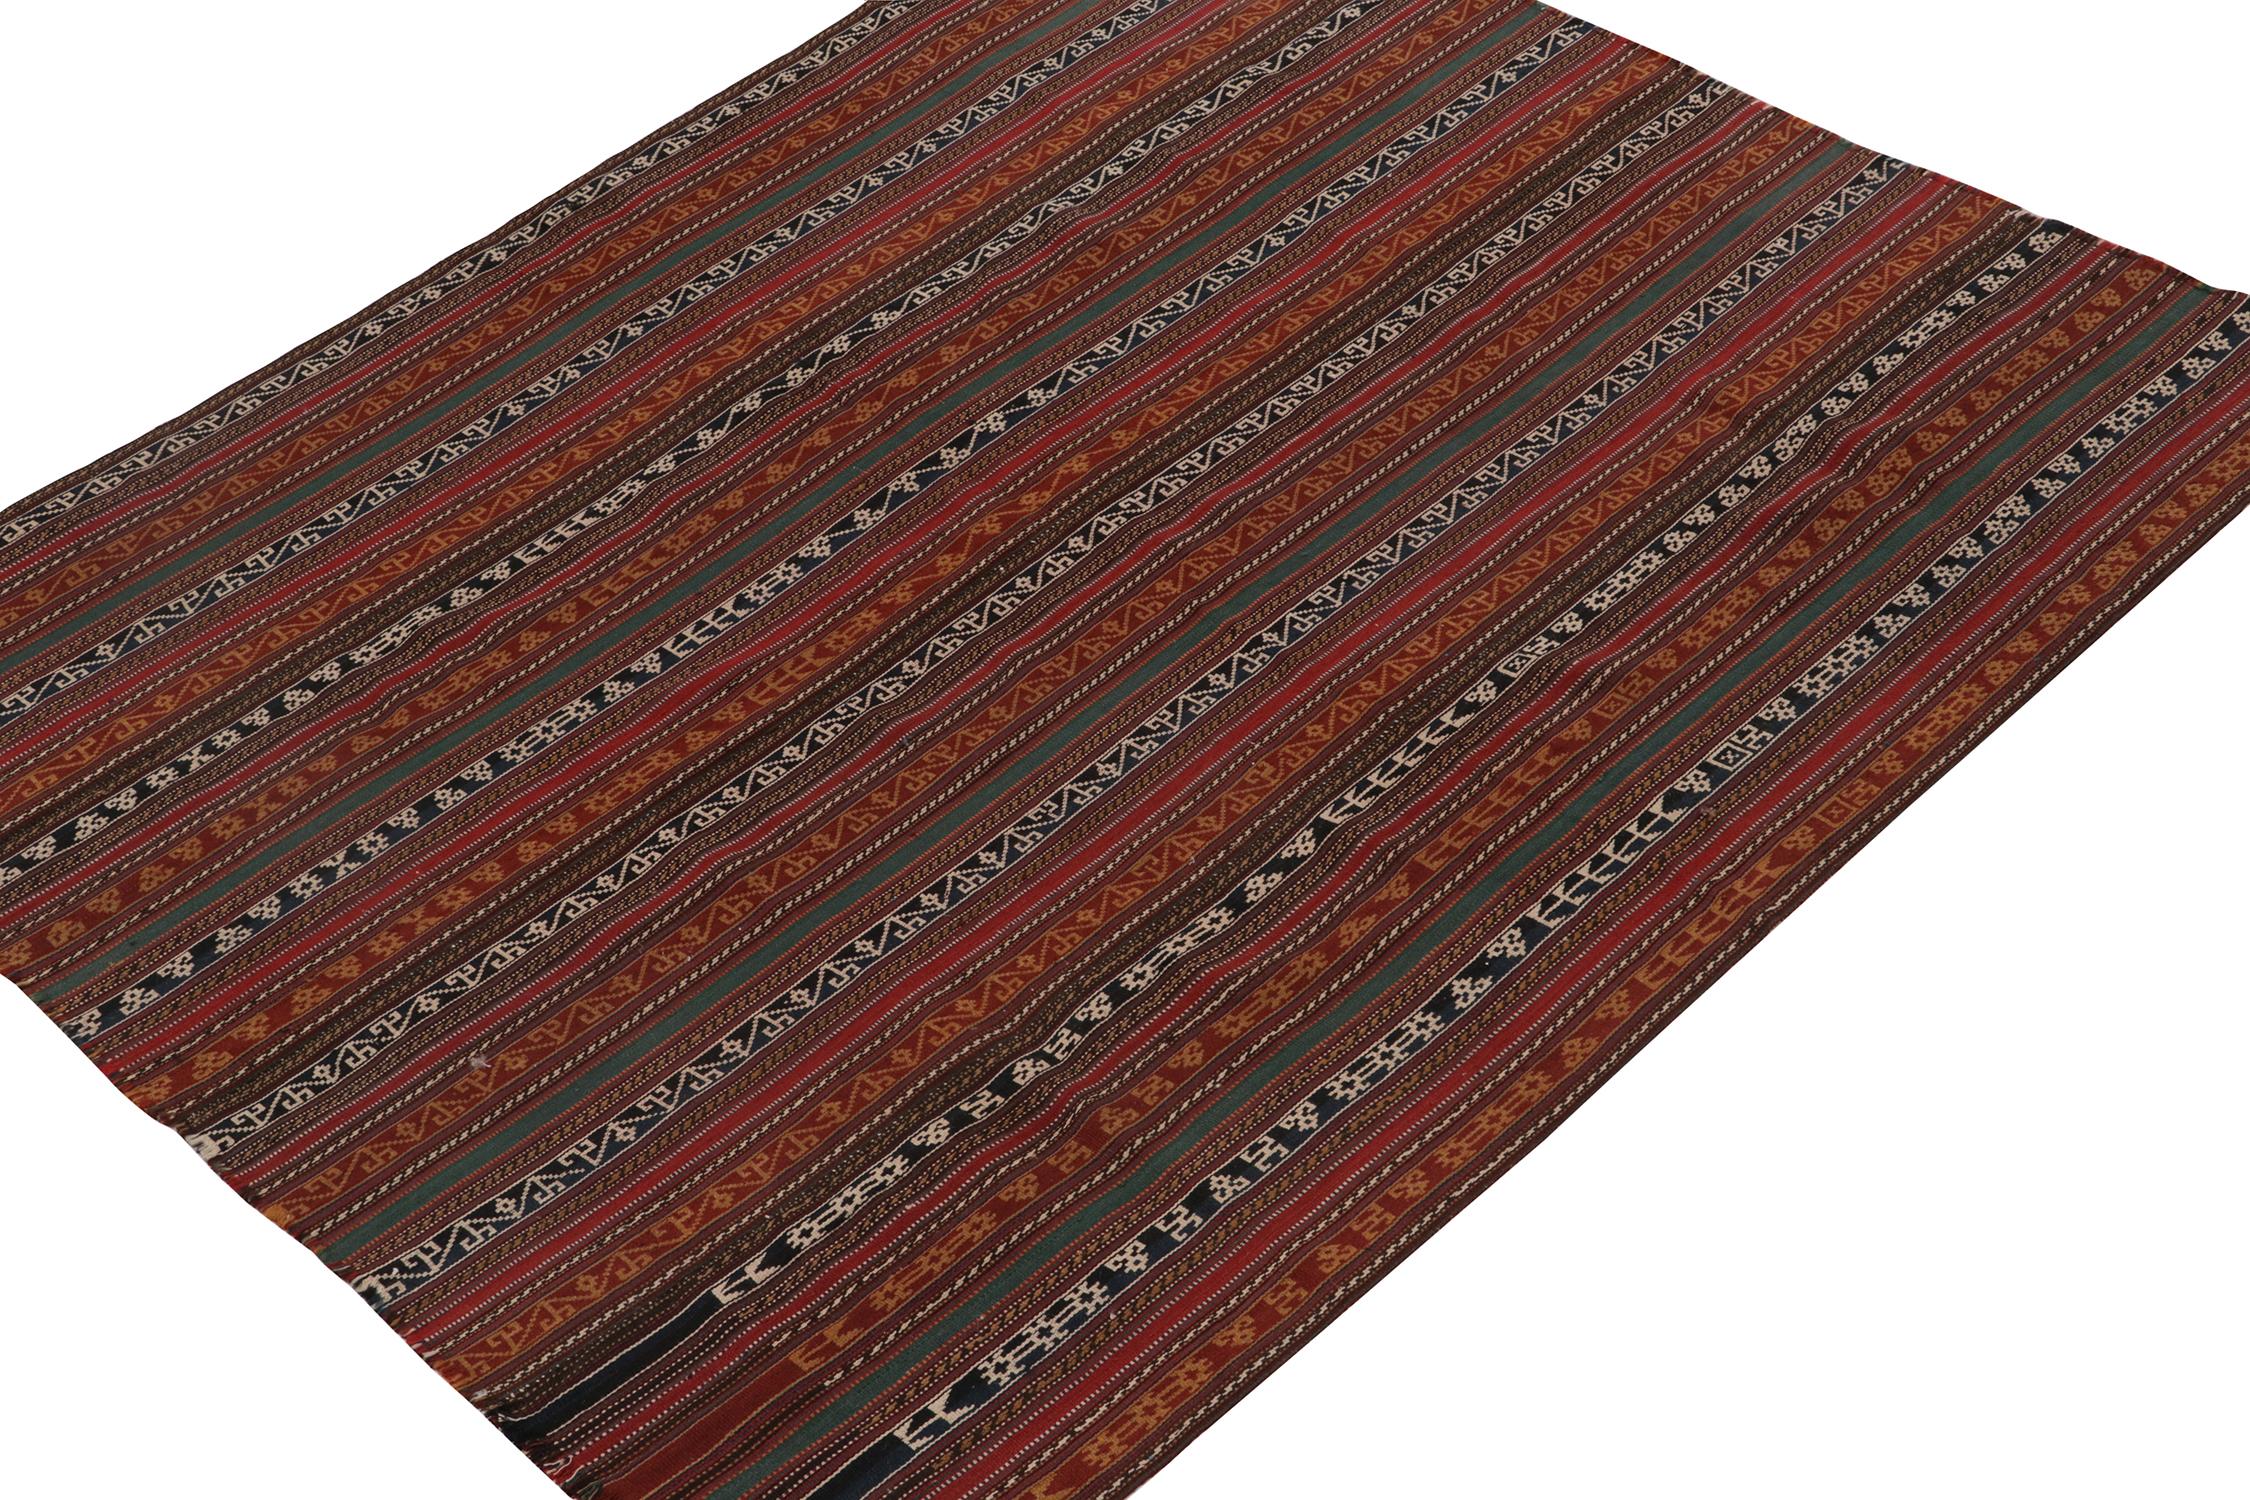 This vintage 6x6 Persian kilim is a unique tribal rug for its period, handwoven in wool circa 1950-1960.

Further on the Design:

The field enjoys vertical stripes with an emphasis on red, blue, black, brown and gold with white highlights.